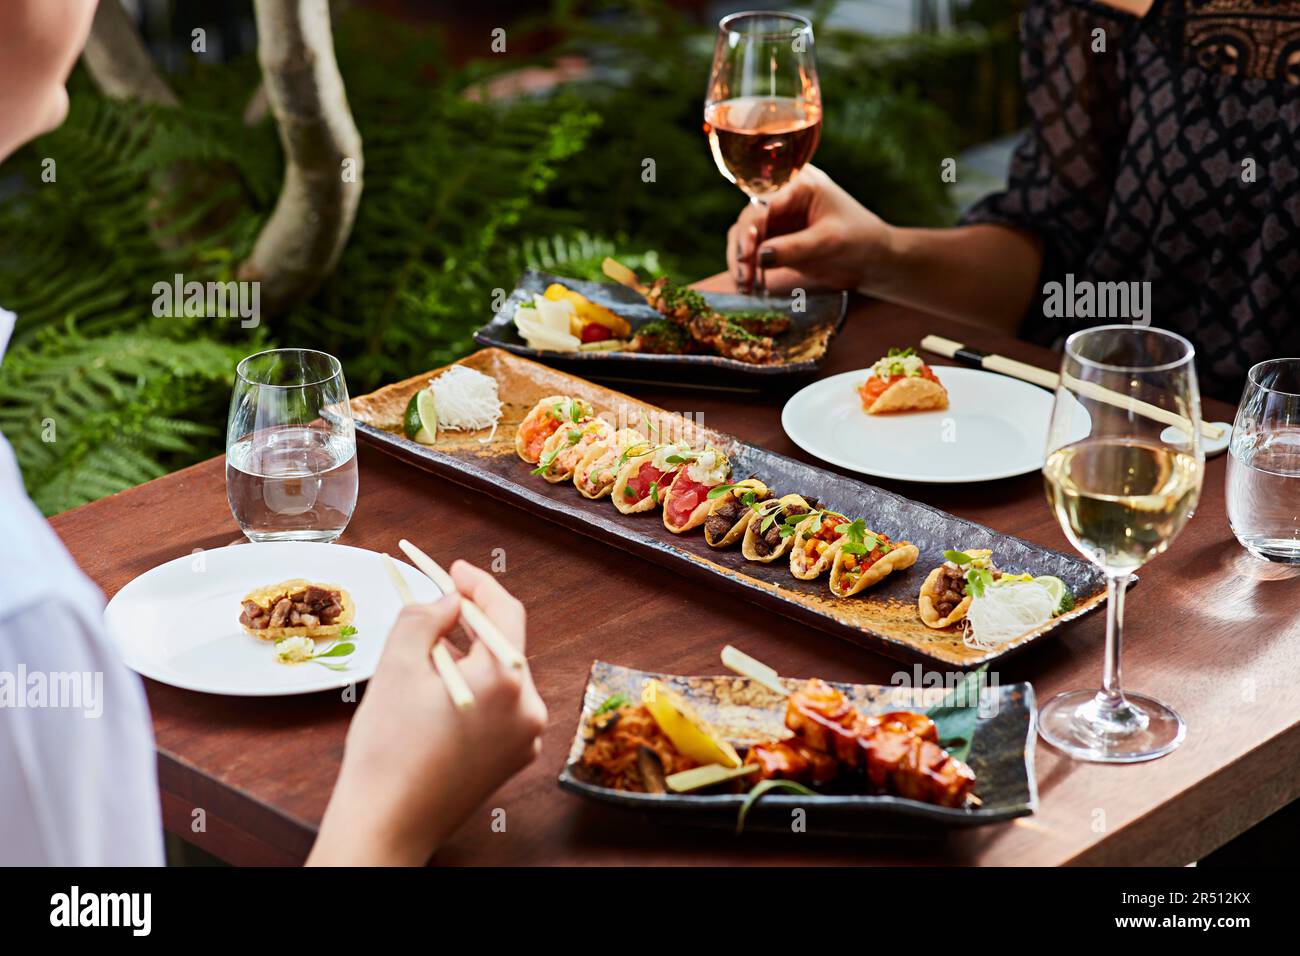 Two people eating mini tacos and drinking wine Stock Photo